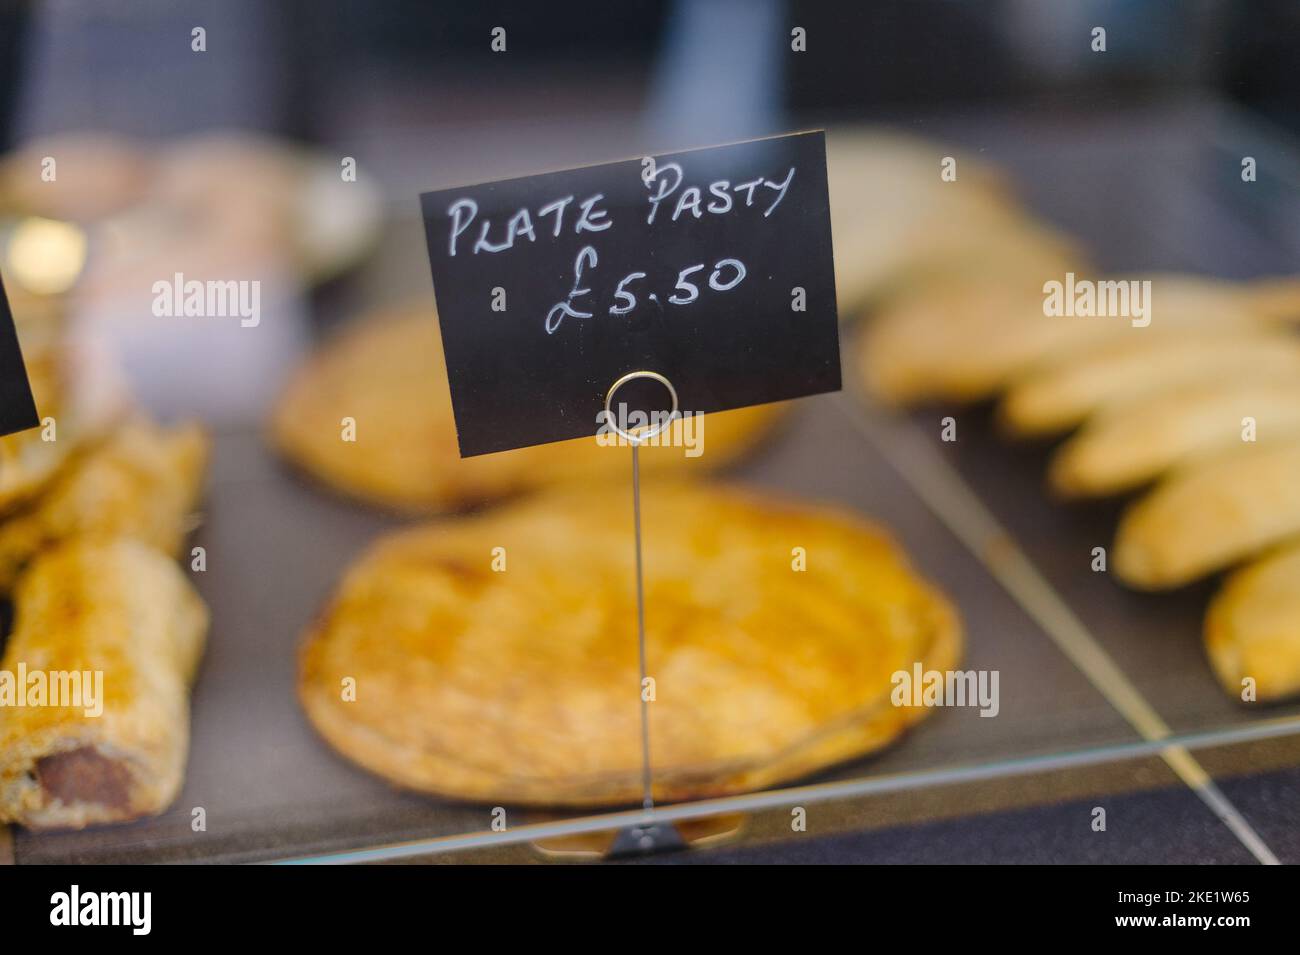 Pie's and pasties for sale in a bakery, hands holding a pie Stock Photo